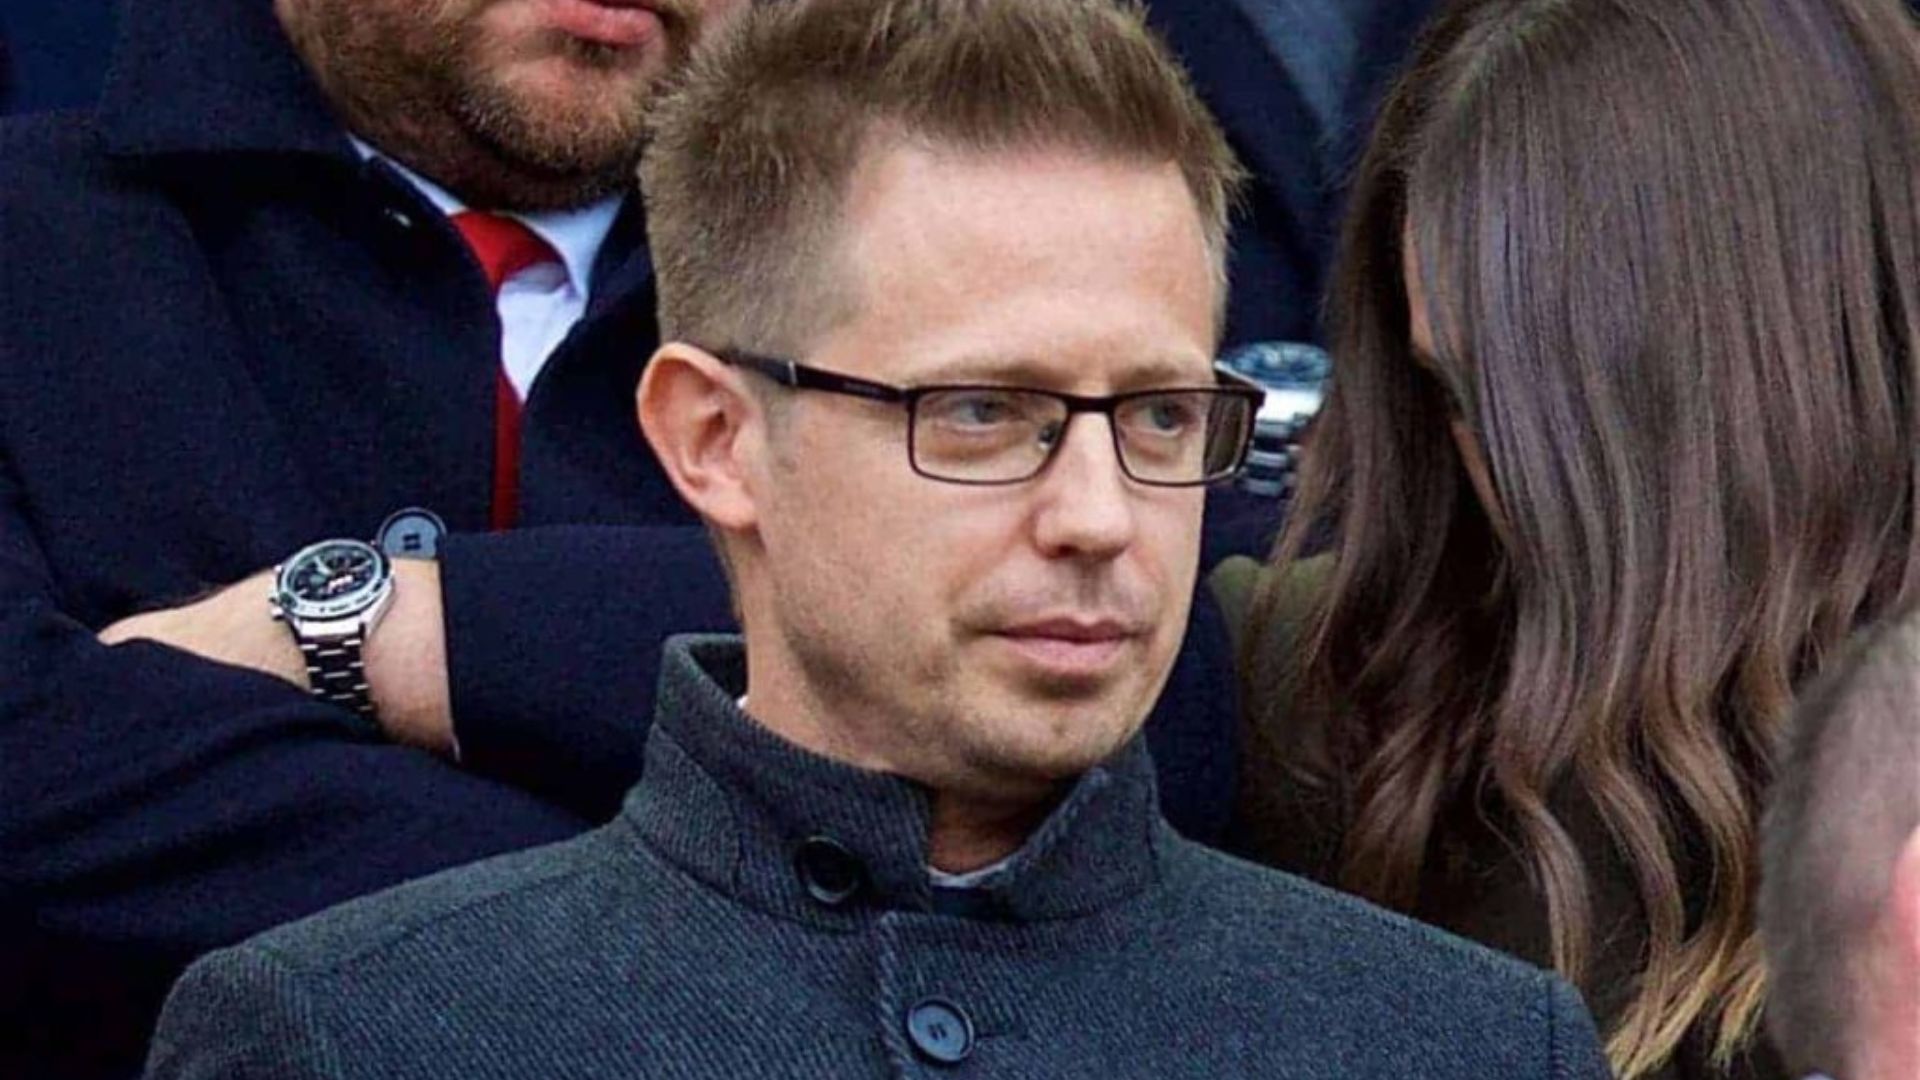 Michael Edwards urged to ‘get it right’ as LFC warned of ‘drop off for many years to come’